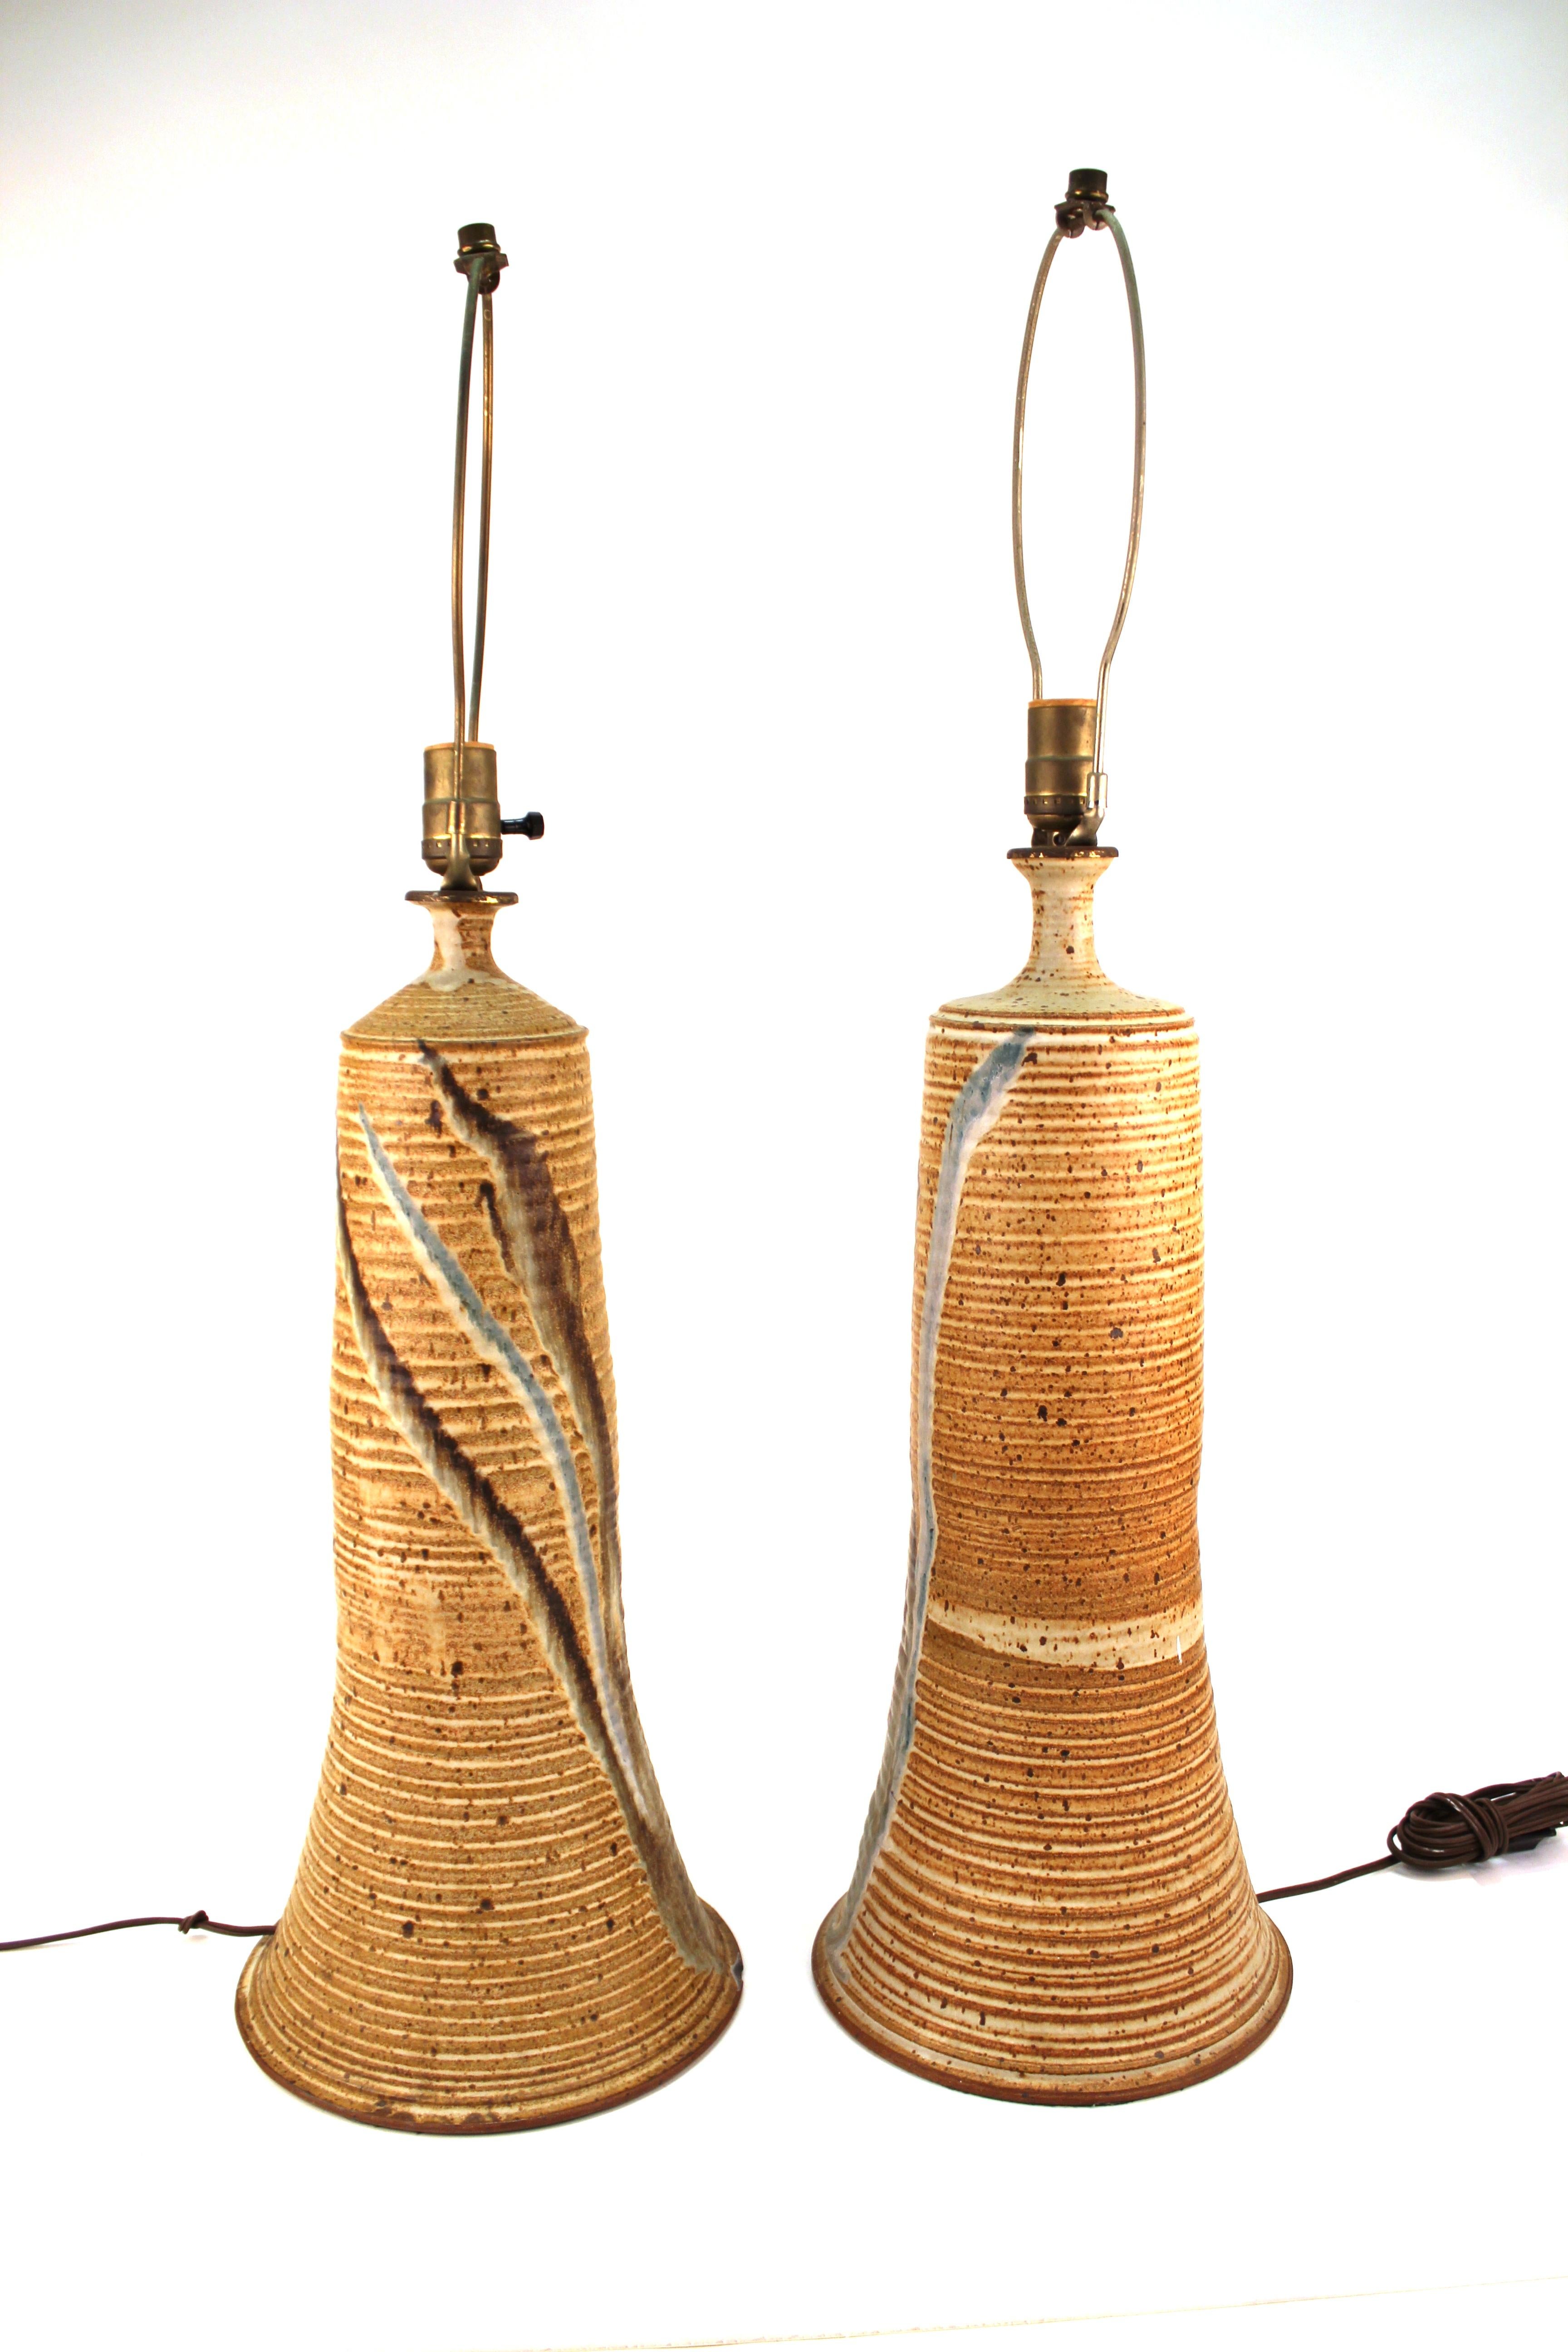 Mid-Century Modern pair of art ceramic table lamps with abstract painted lines on the front. The pair is in great vintage condition with some age-appropriate wear to the bases.